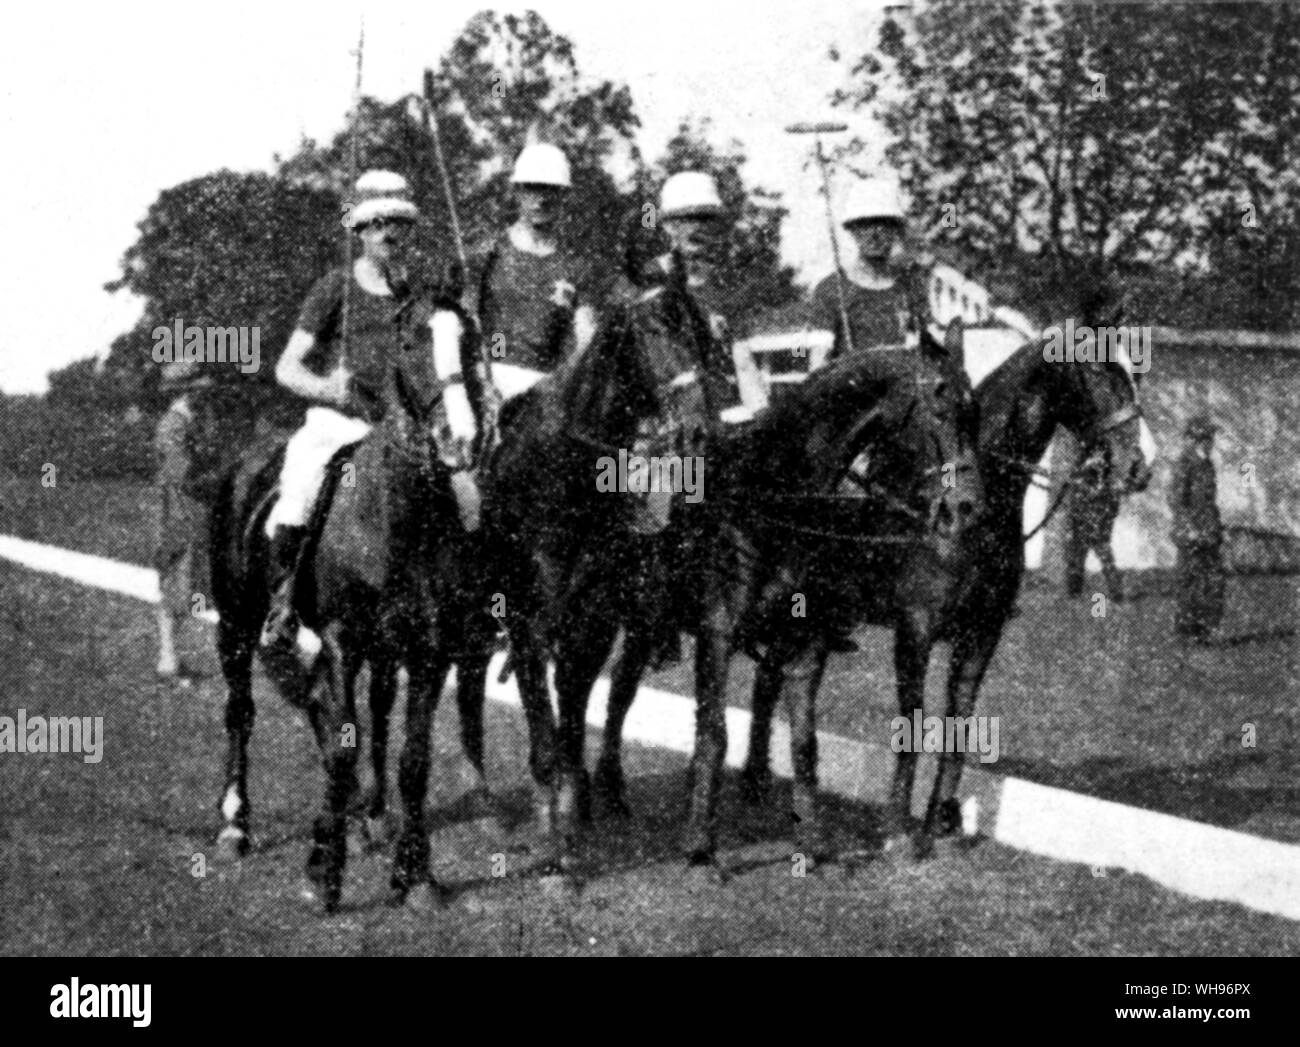 France, Paris Olympics, 1924: Great Britain's Polo team came third in the competition. l-r: F Barrett, H Wise, F Guest Captain, D Bingham.. Stock Photo